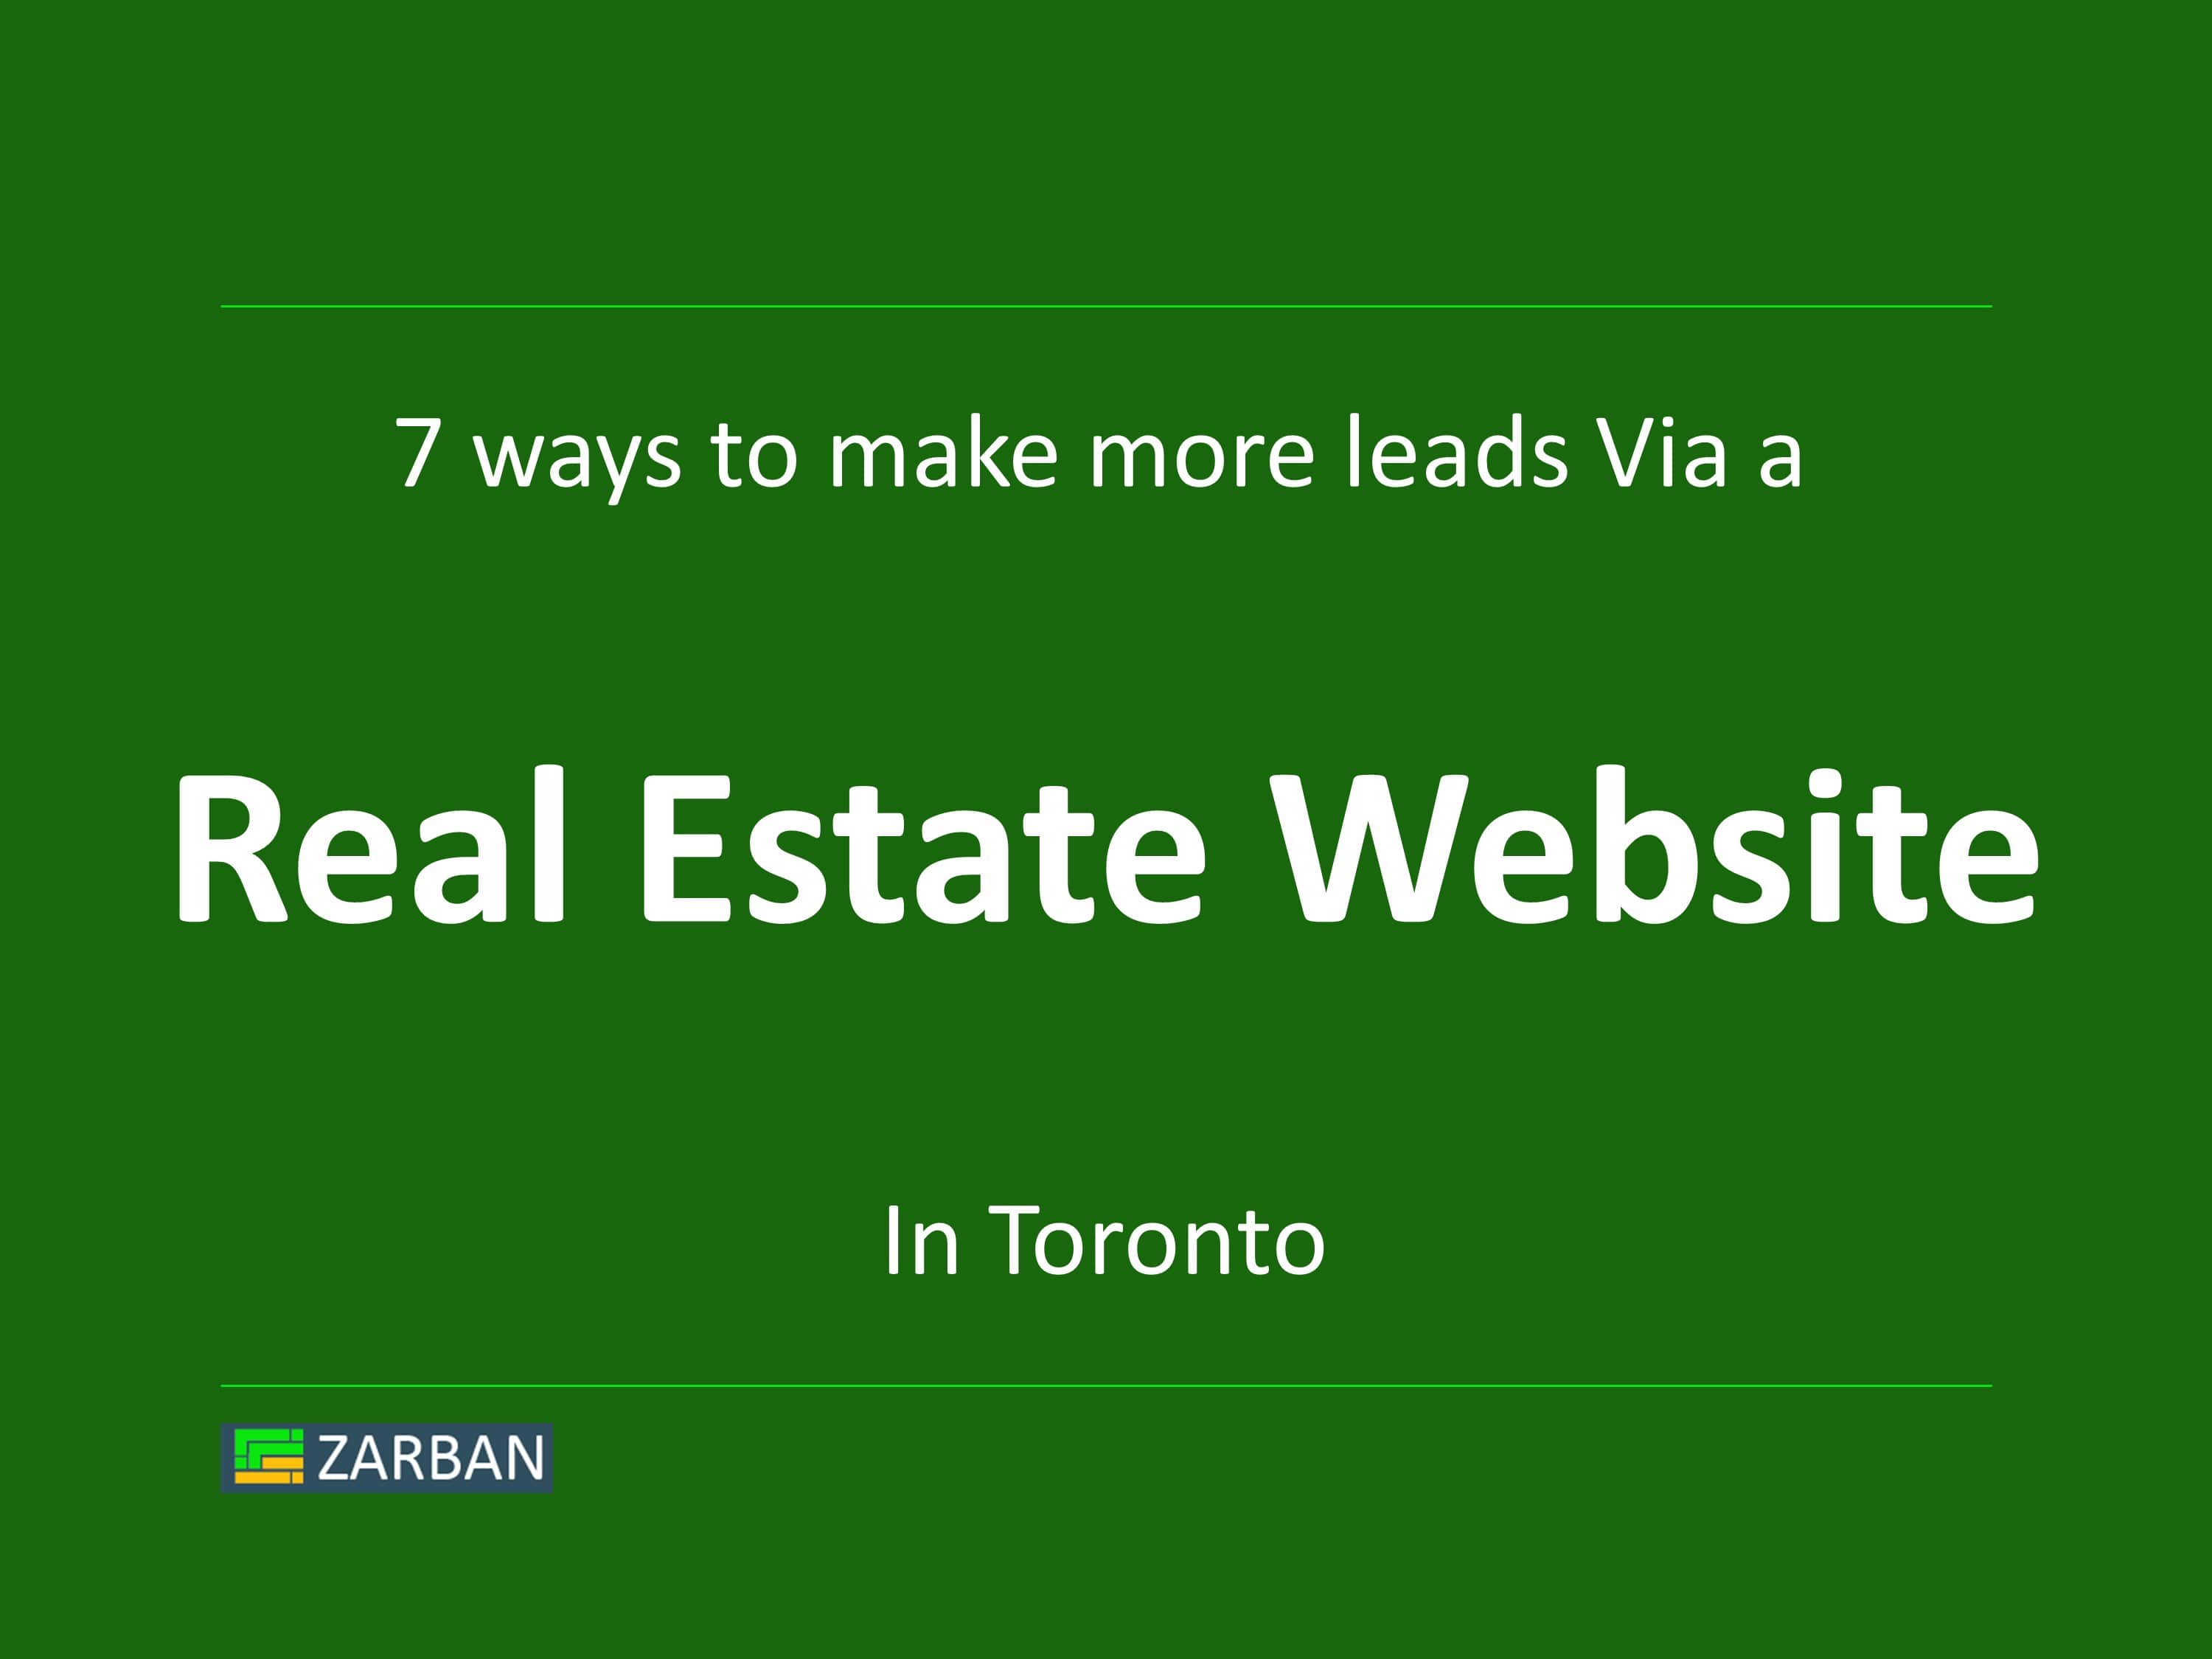 Realtor Website 7 ways to make more leads in Toronto